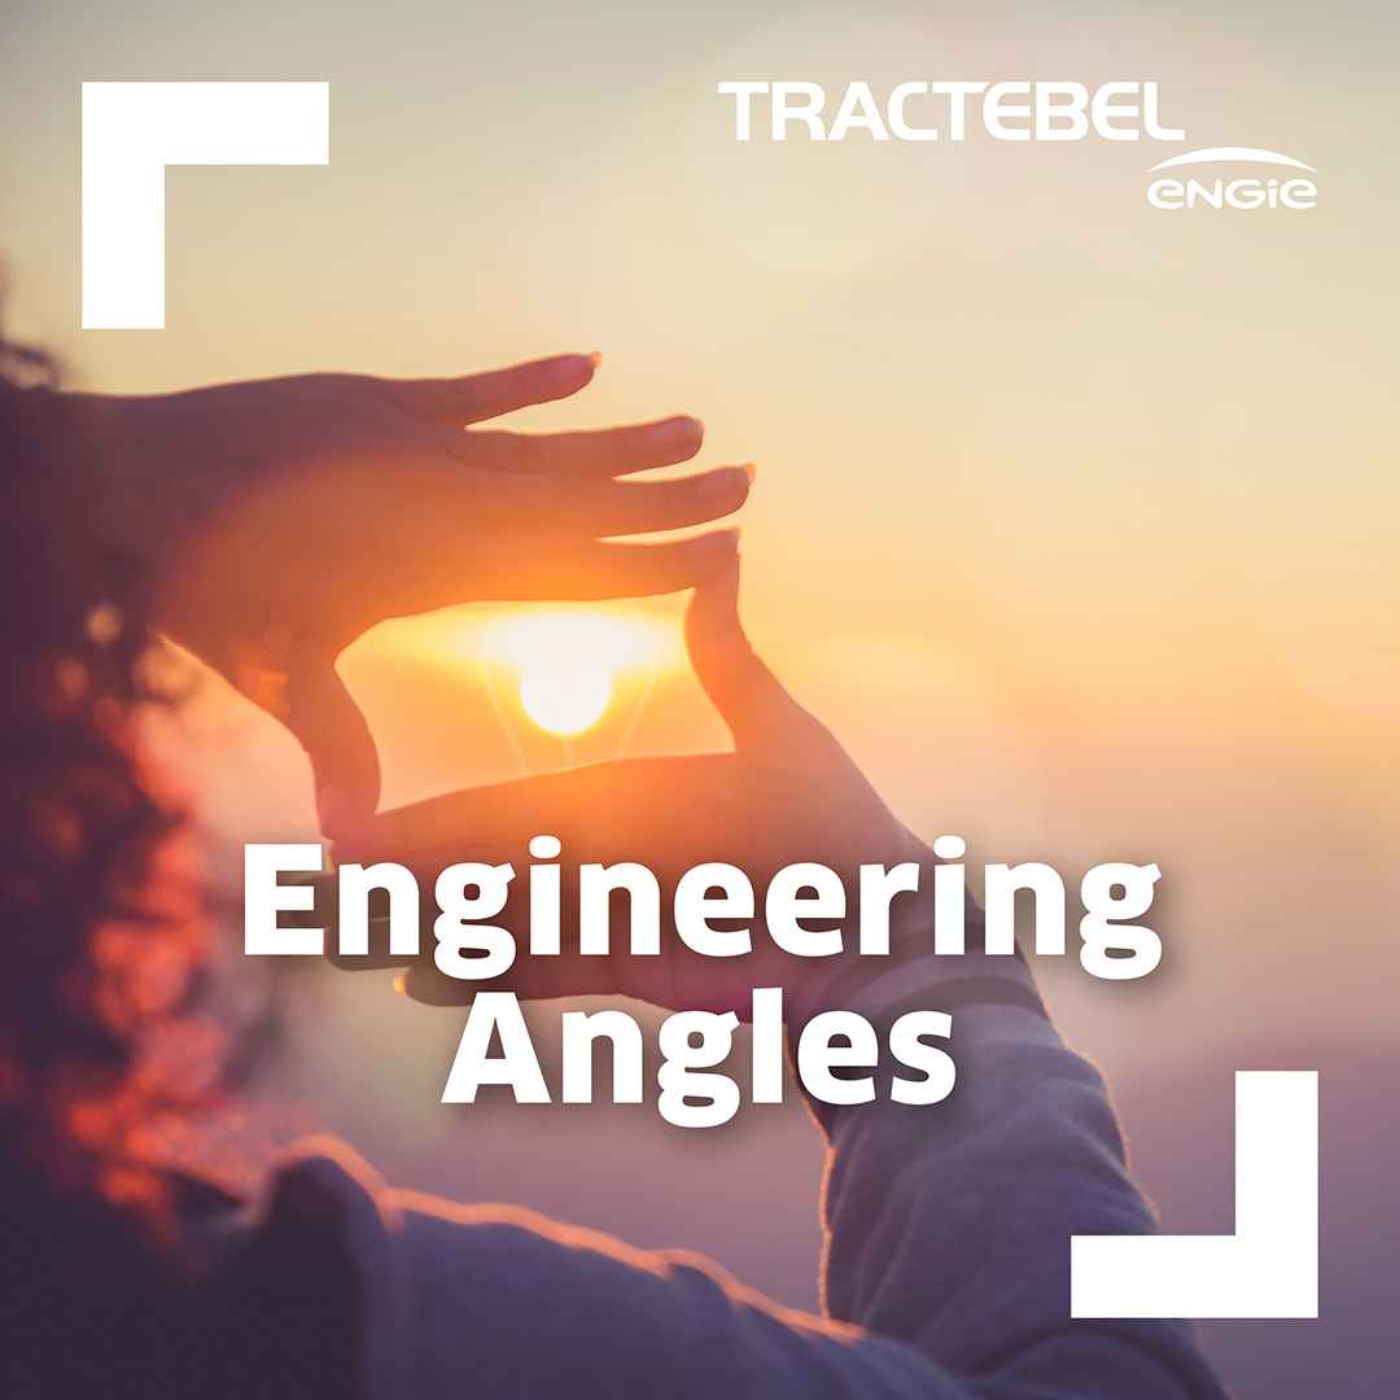 Explore the variety of careers related to engineering in Tractebel